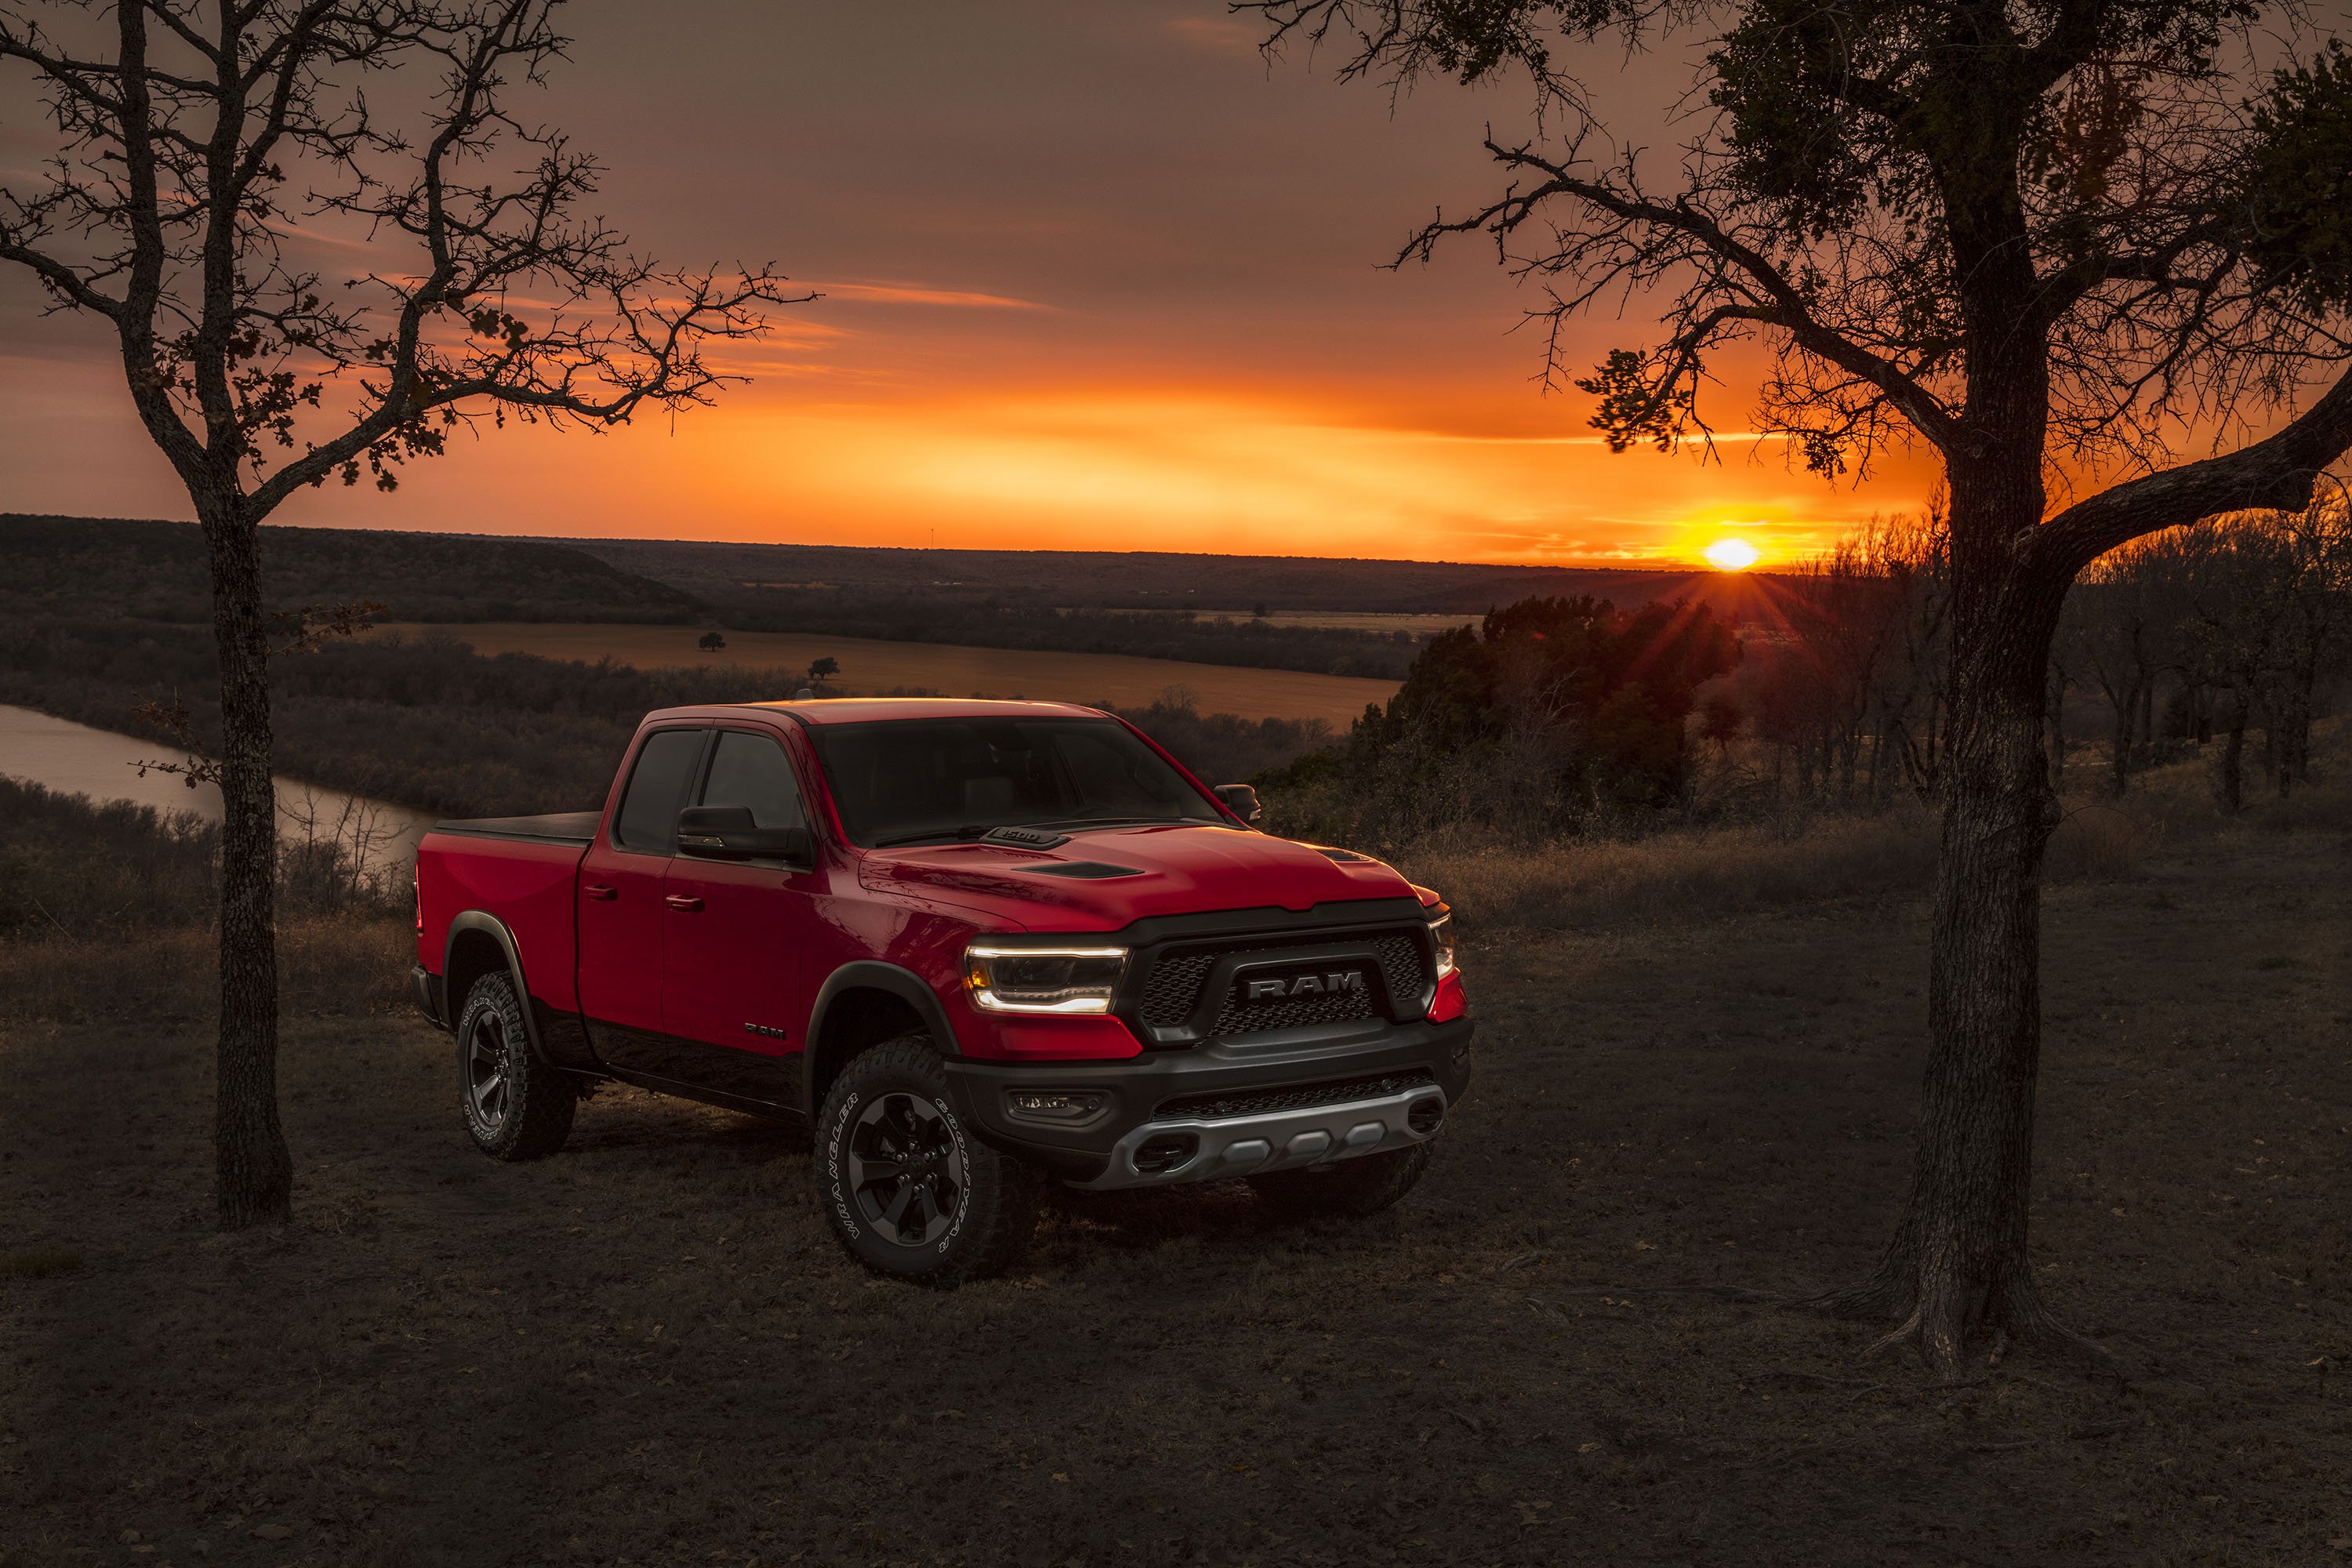 Wallpaper Of The Day - 2019 Ram 1500 , HD Wallpaper & Backgrounds